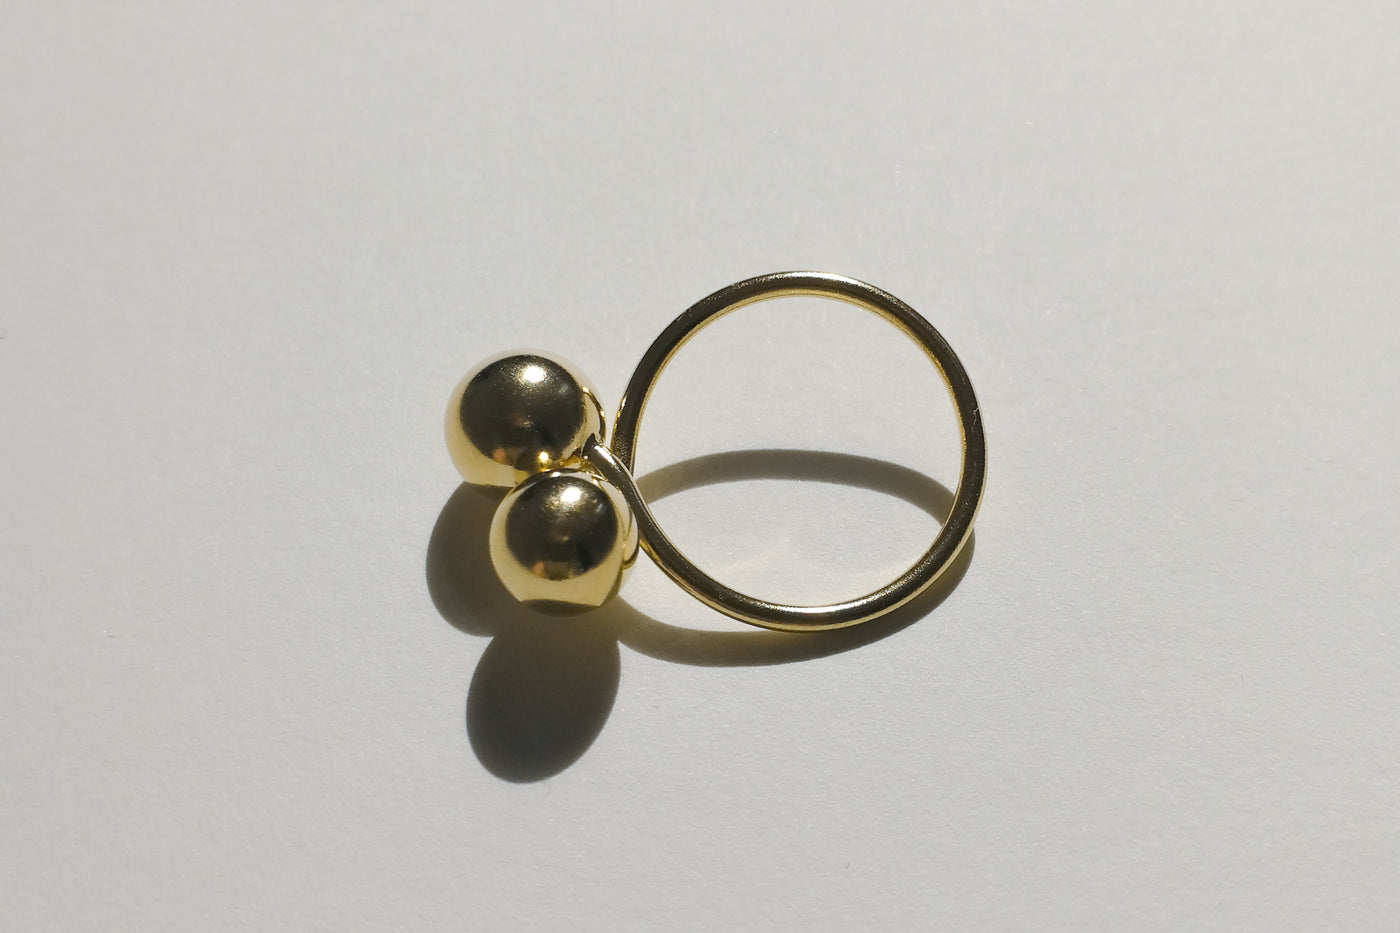 Sphere ring no4, gold-plated